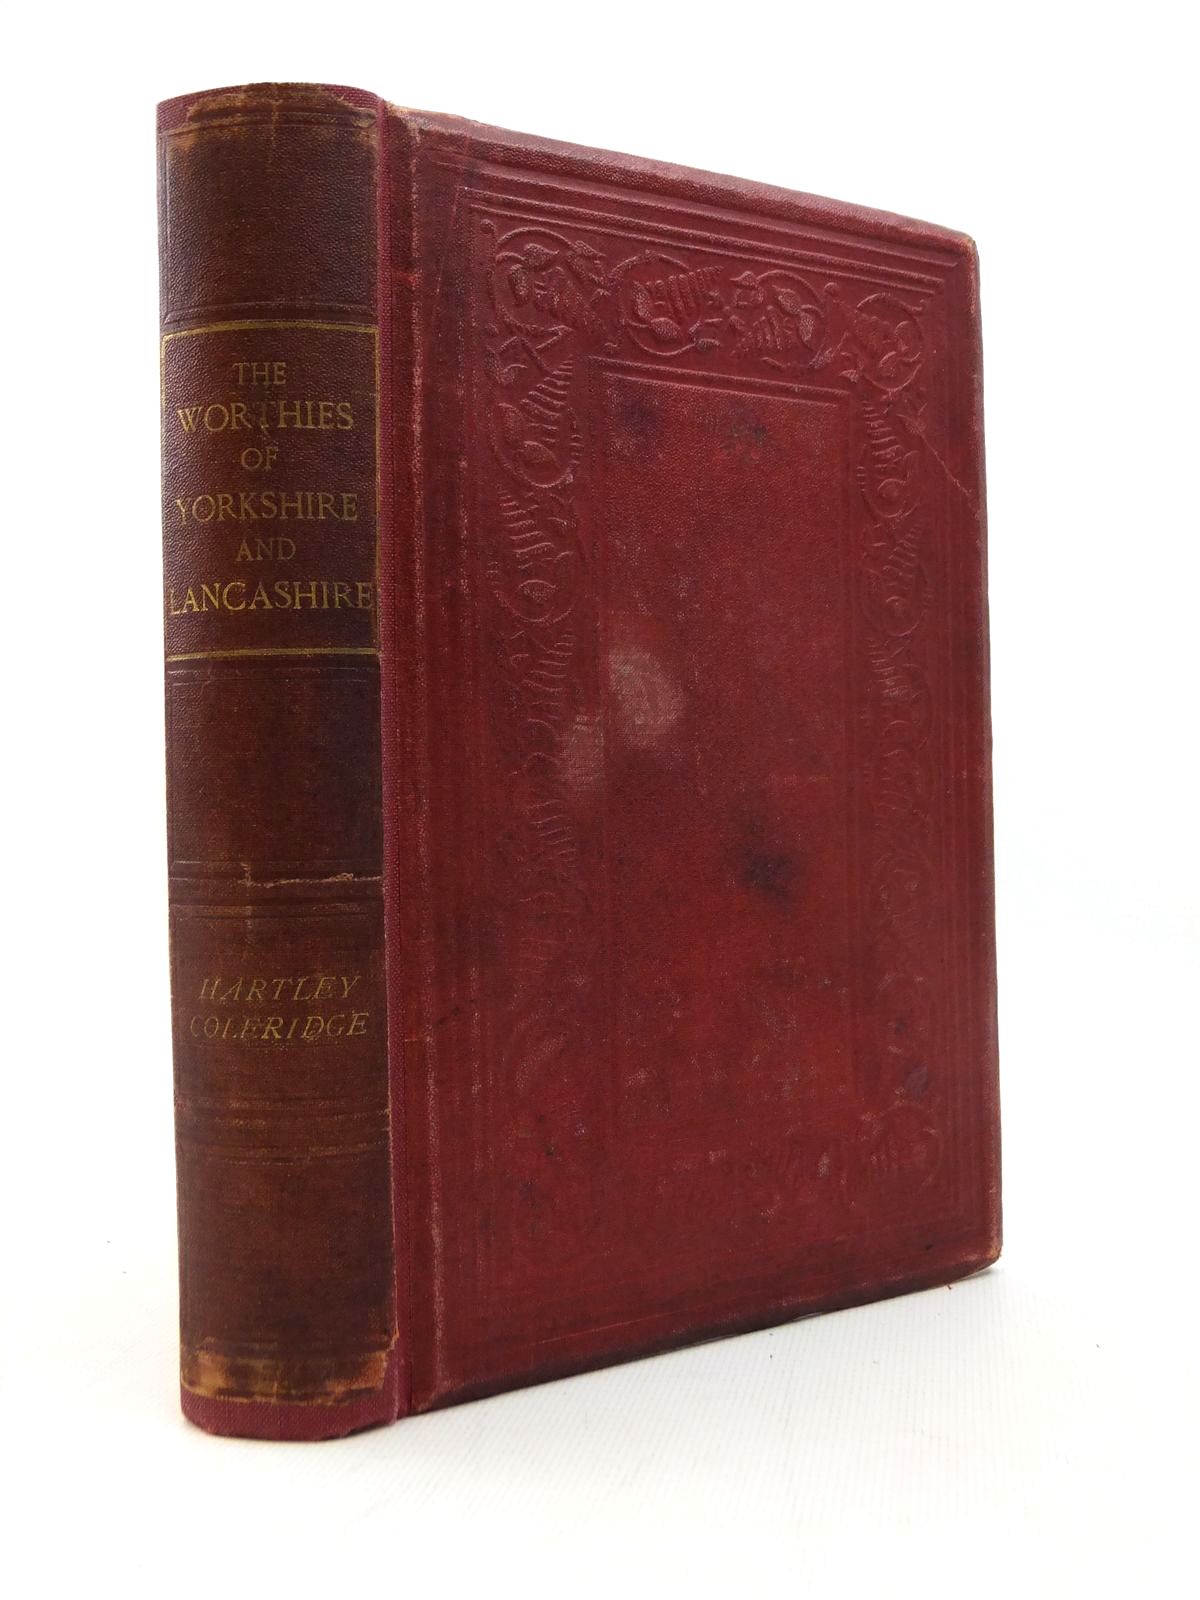 Photo of THE WORTHIES OF YORKSHIRE AND LANCASHIRE written by Coleridge, Hartley published by Frederick Warne &amp; Co. (STOCK CODE: 1208783)  for sale by Stella & Rose's Books